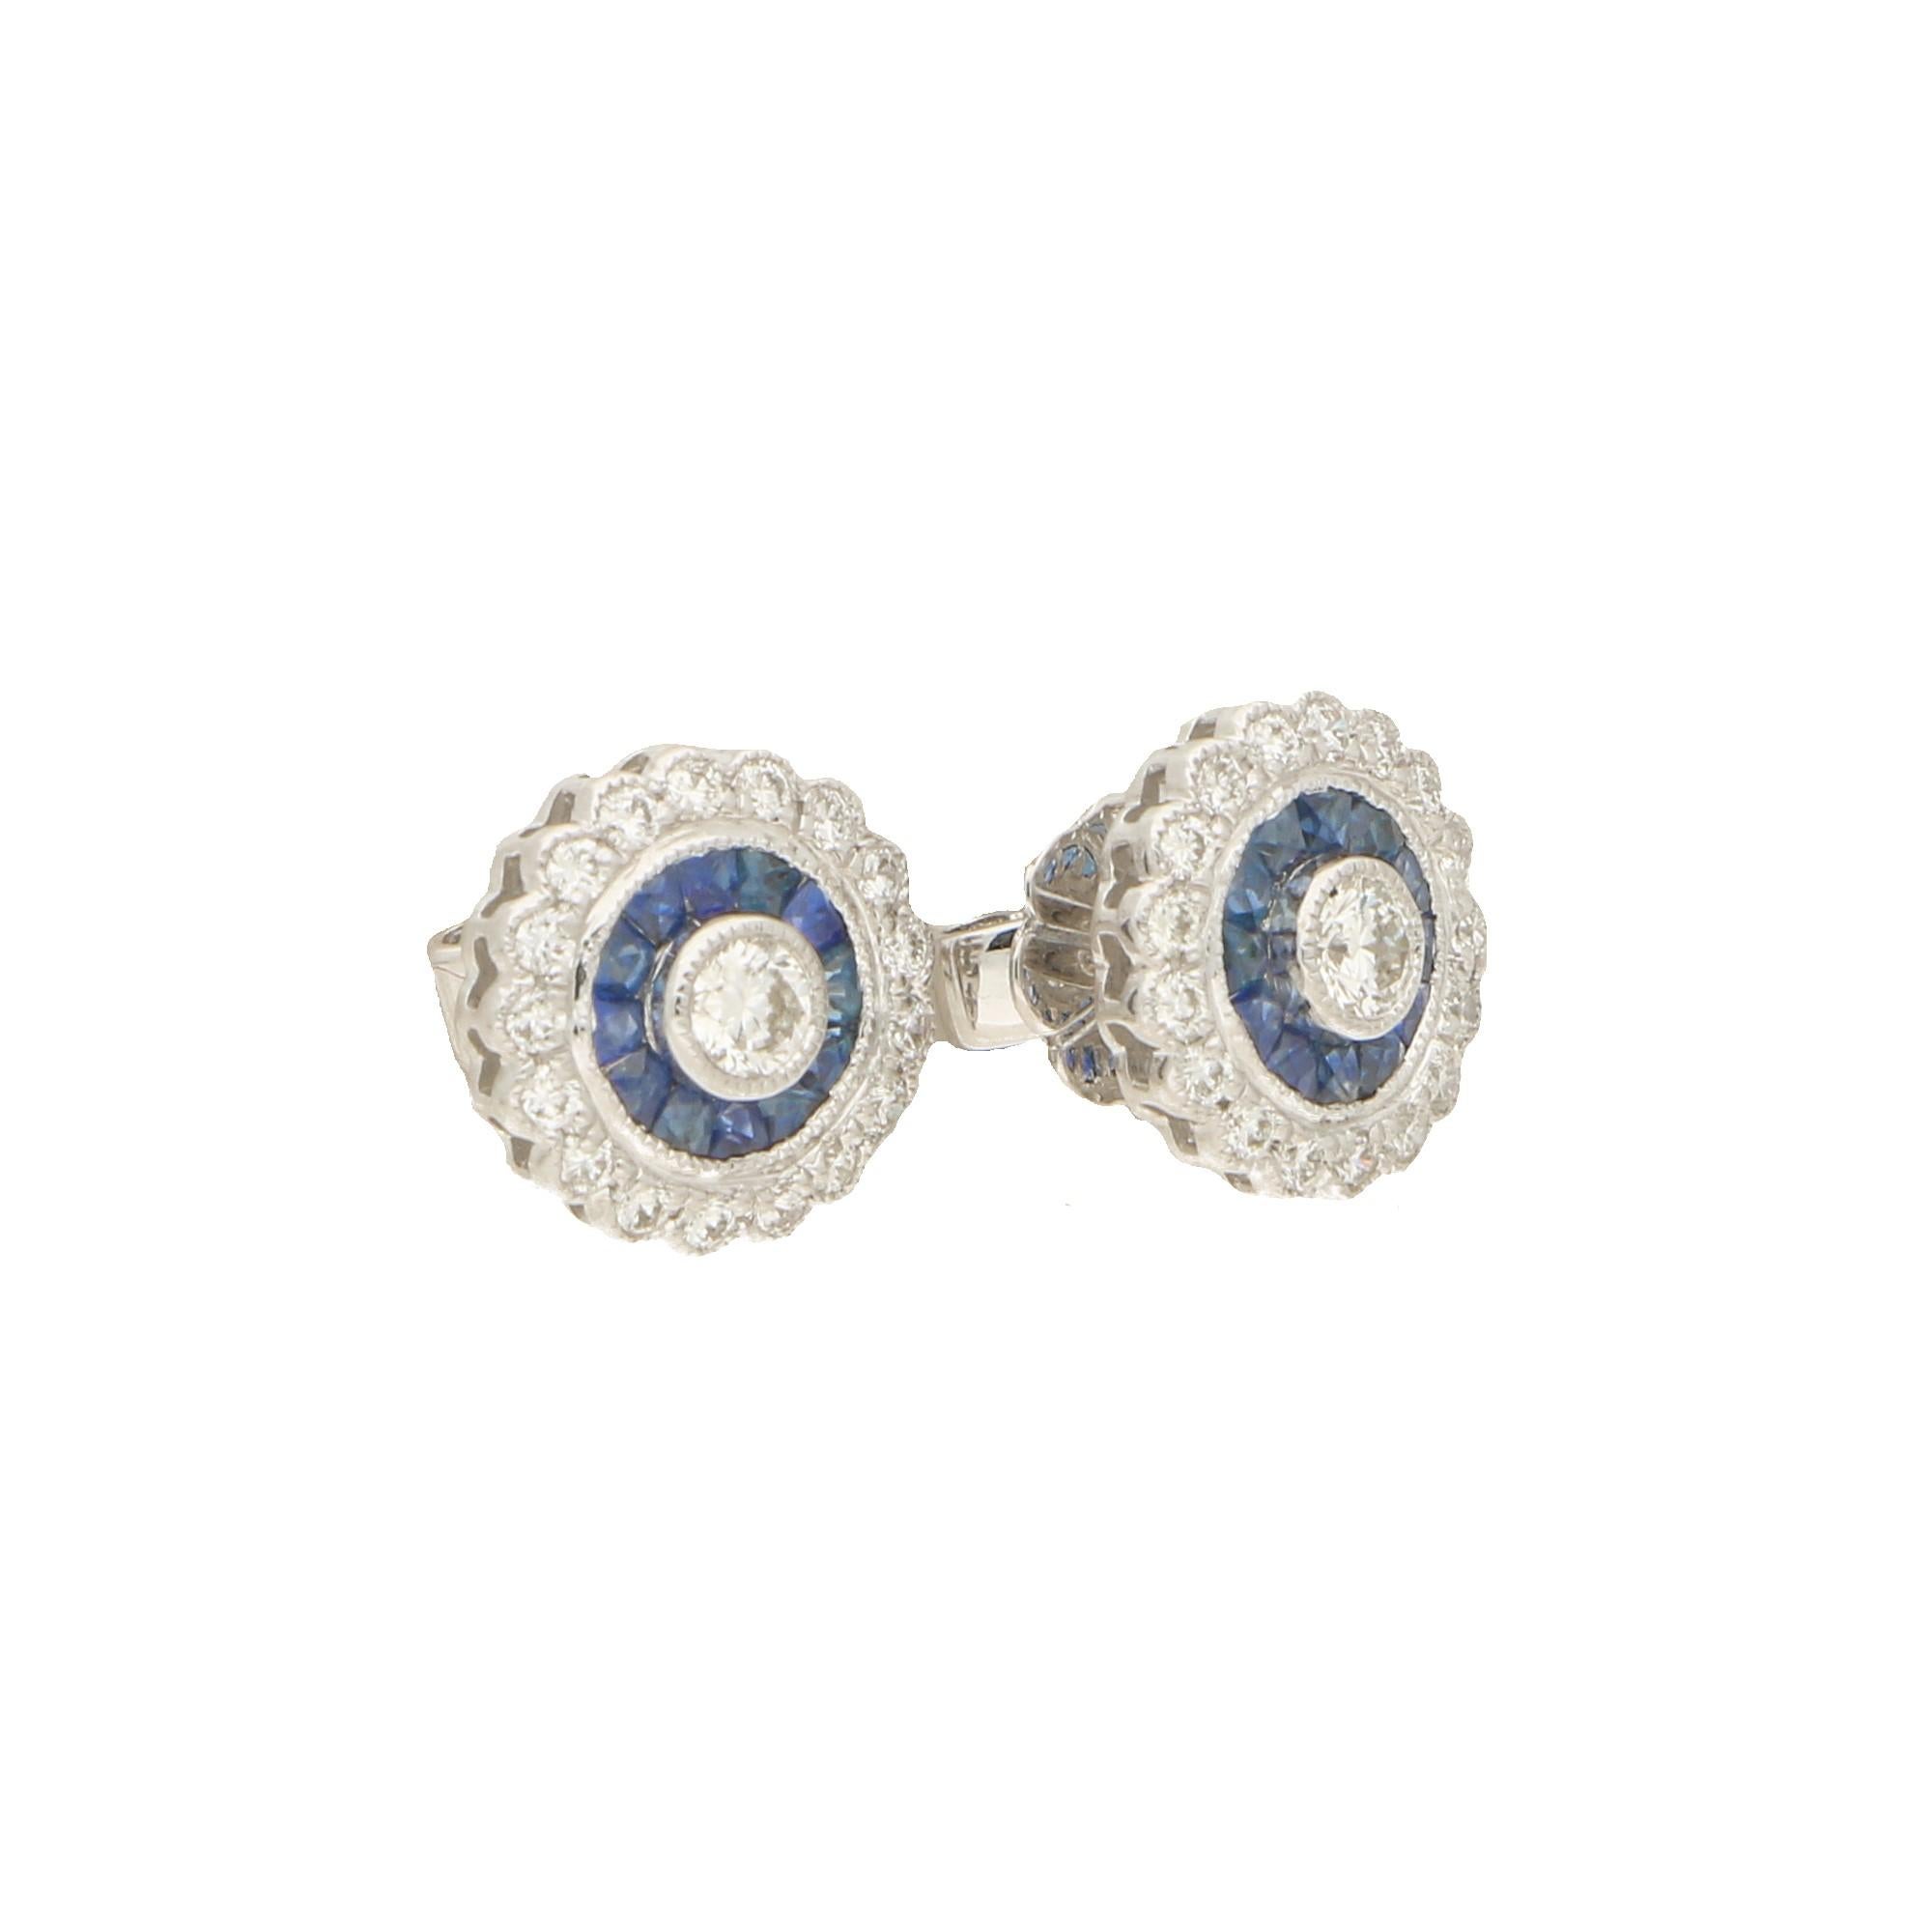 A spectacular pair of sapphire and diamond round target style earrings. 
A central round brilliant cut diamond is bezel set in 18ct white gold to a surround of French cut blue sapphires, which in turn is set to a surround of grain set diamonds, all